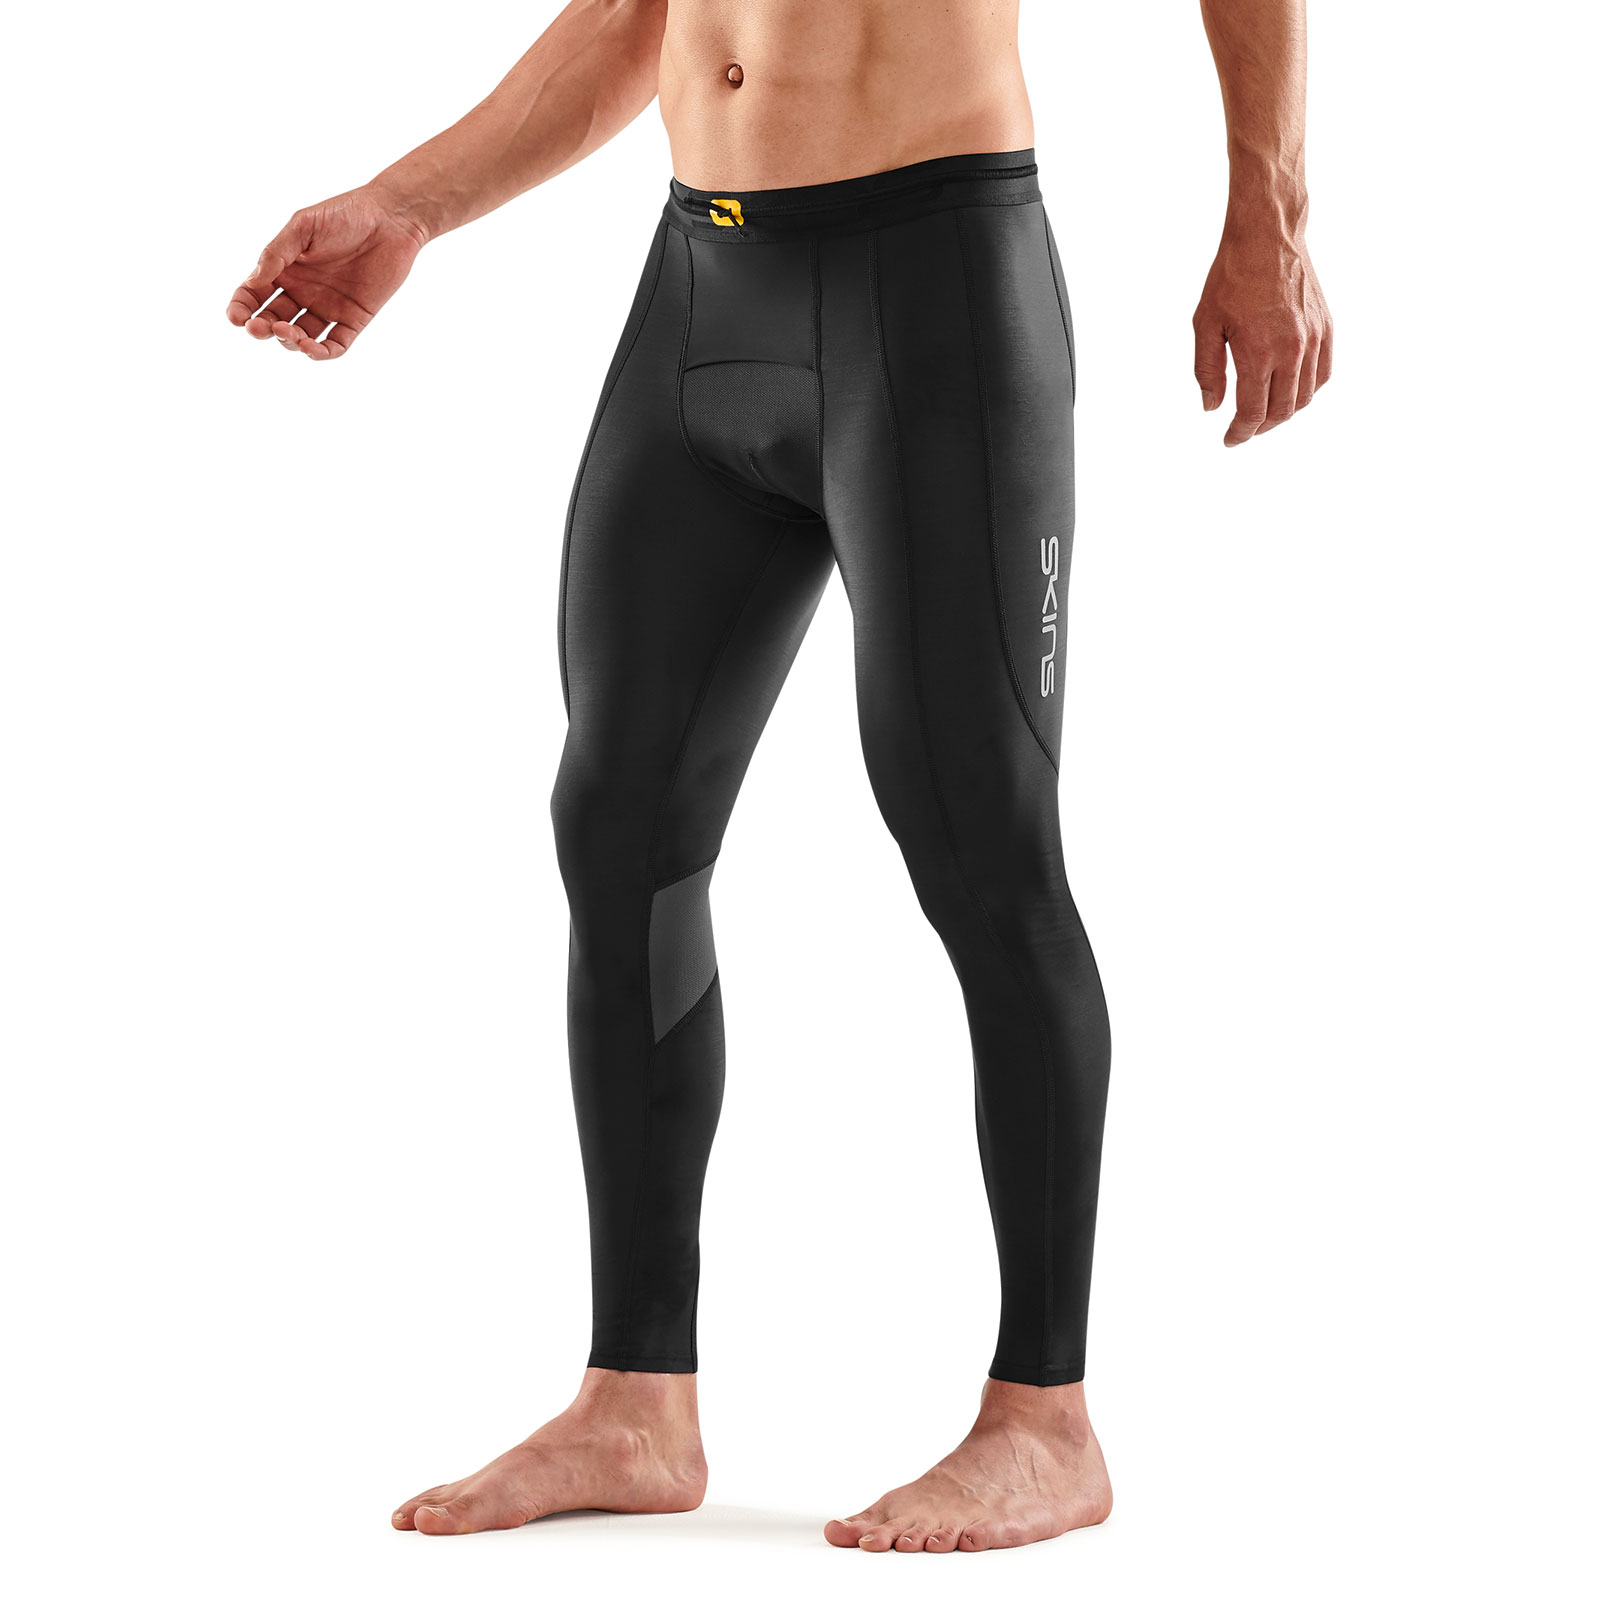 SKINS Compression 3-Series Unisex Seamless Recovery Calf Sleeves - Black